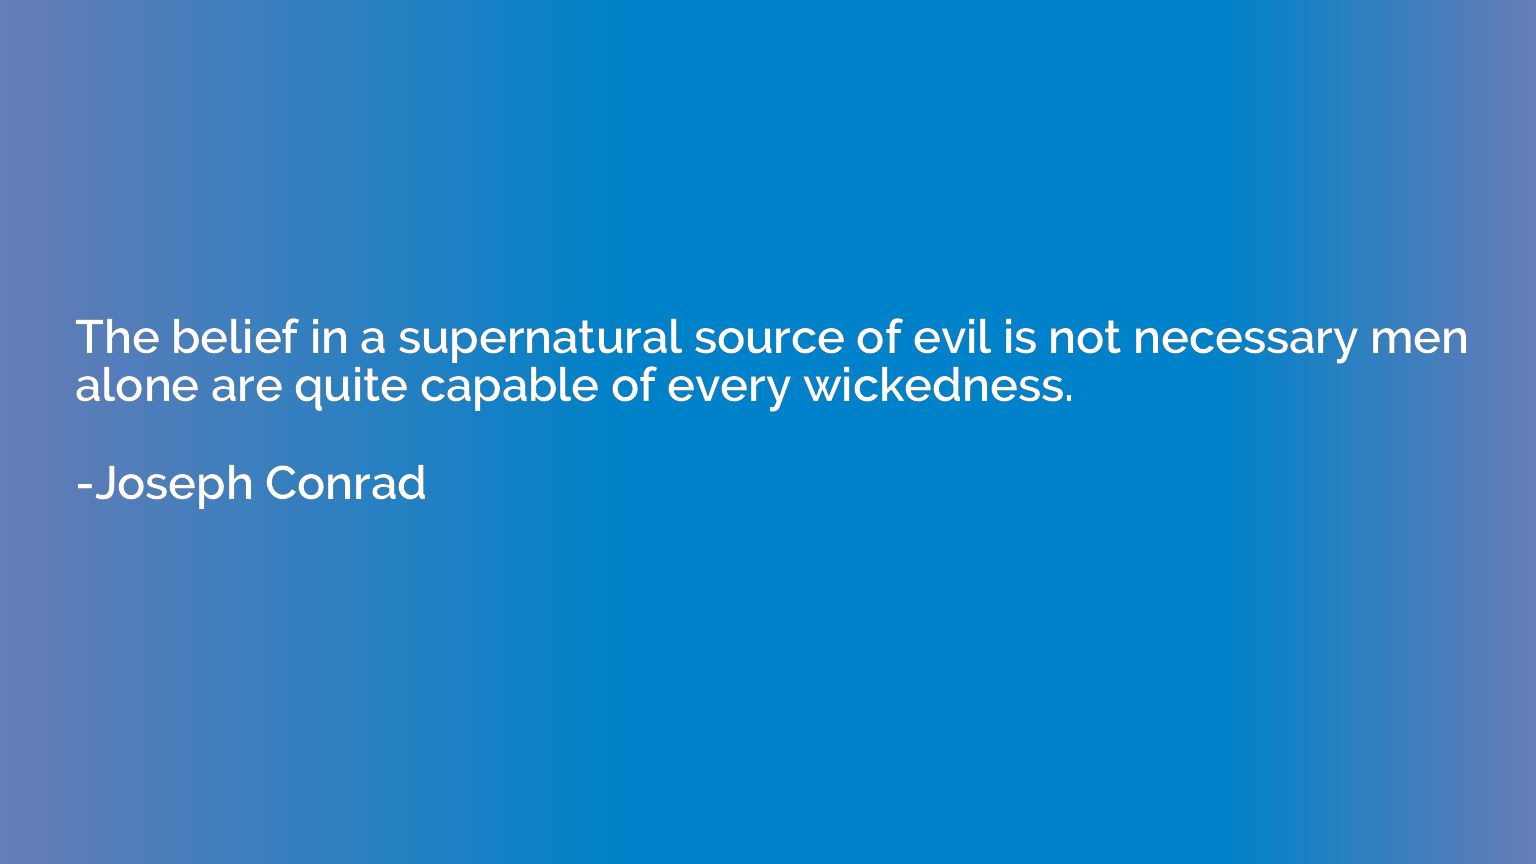 The belief in a supernatural source of evil is not necessary